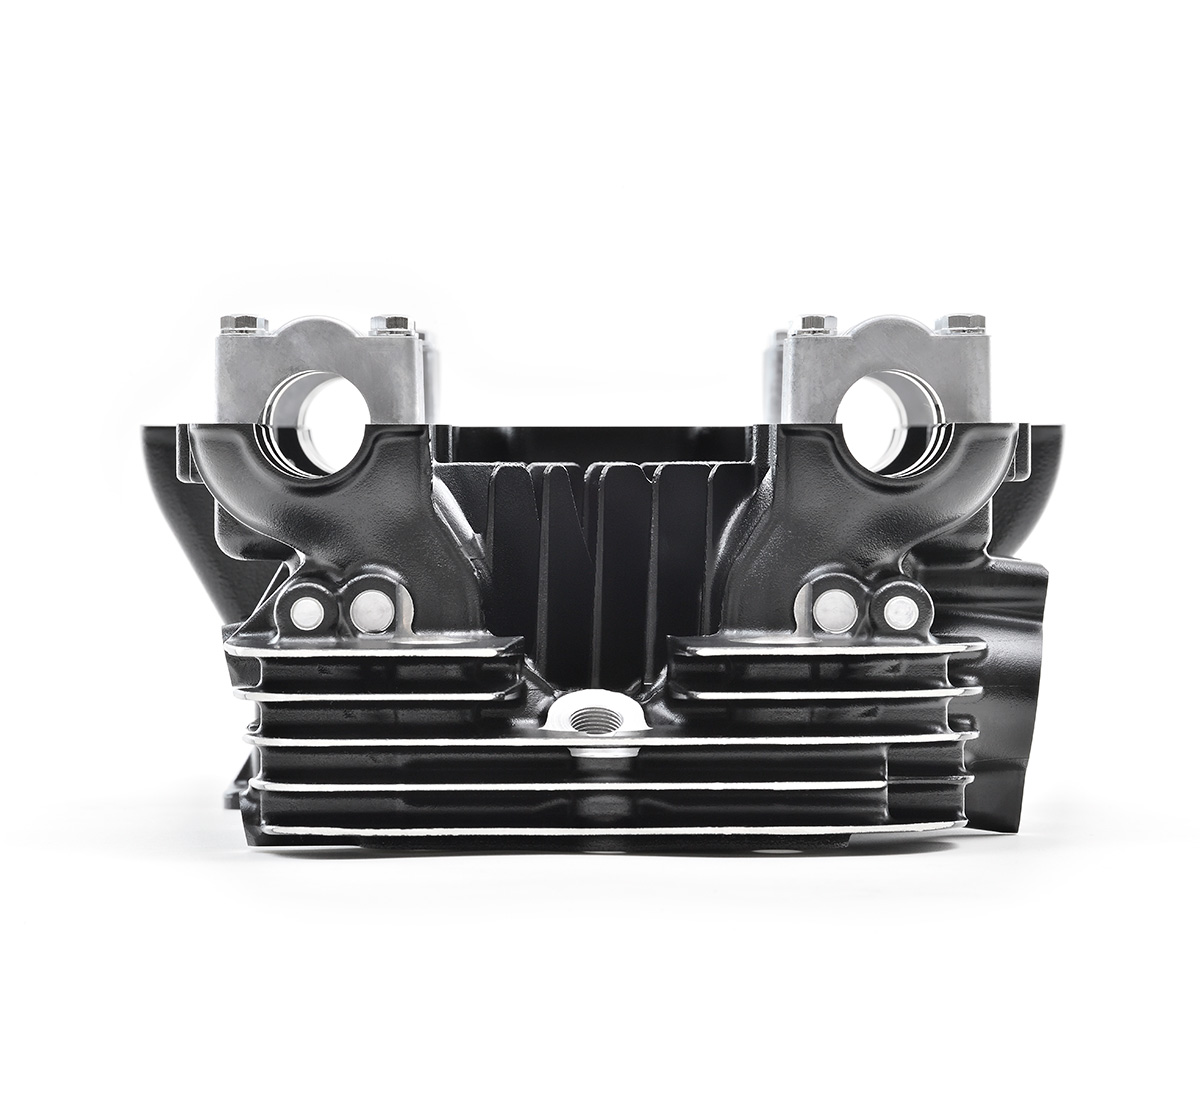 Reproduction Z1 Cylinder Head, Black